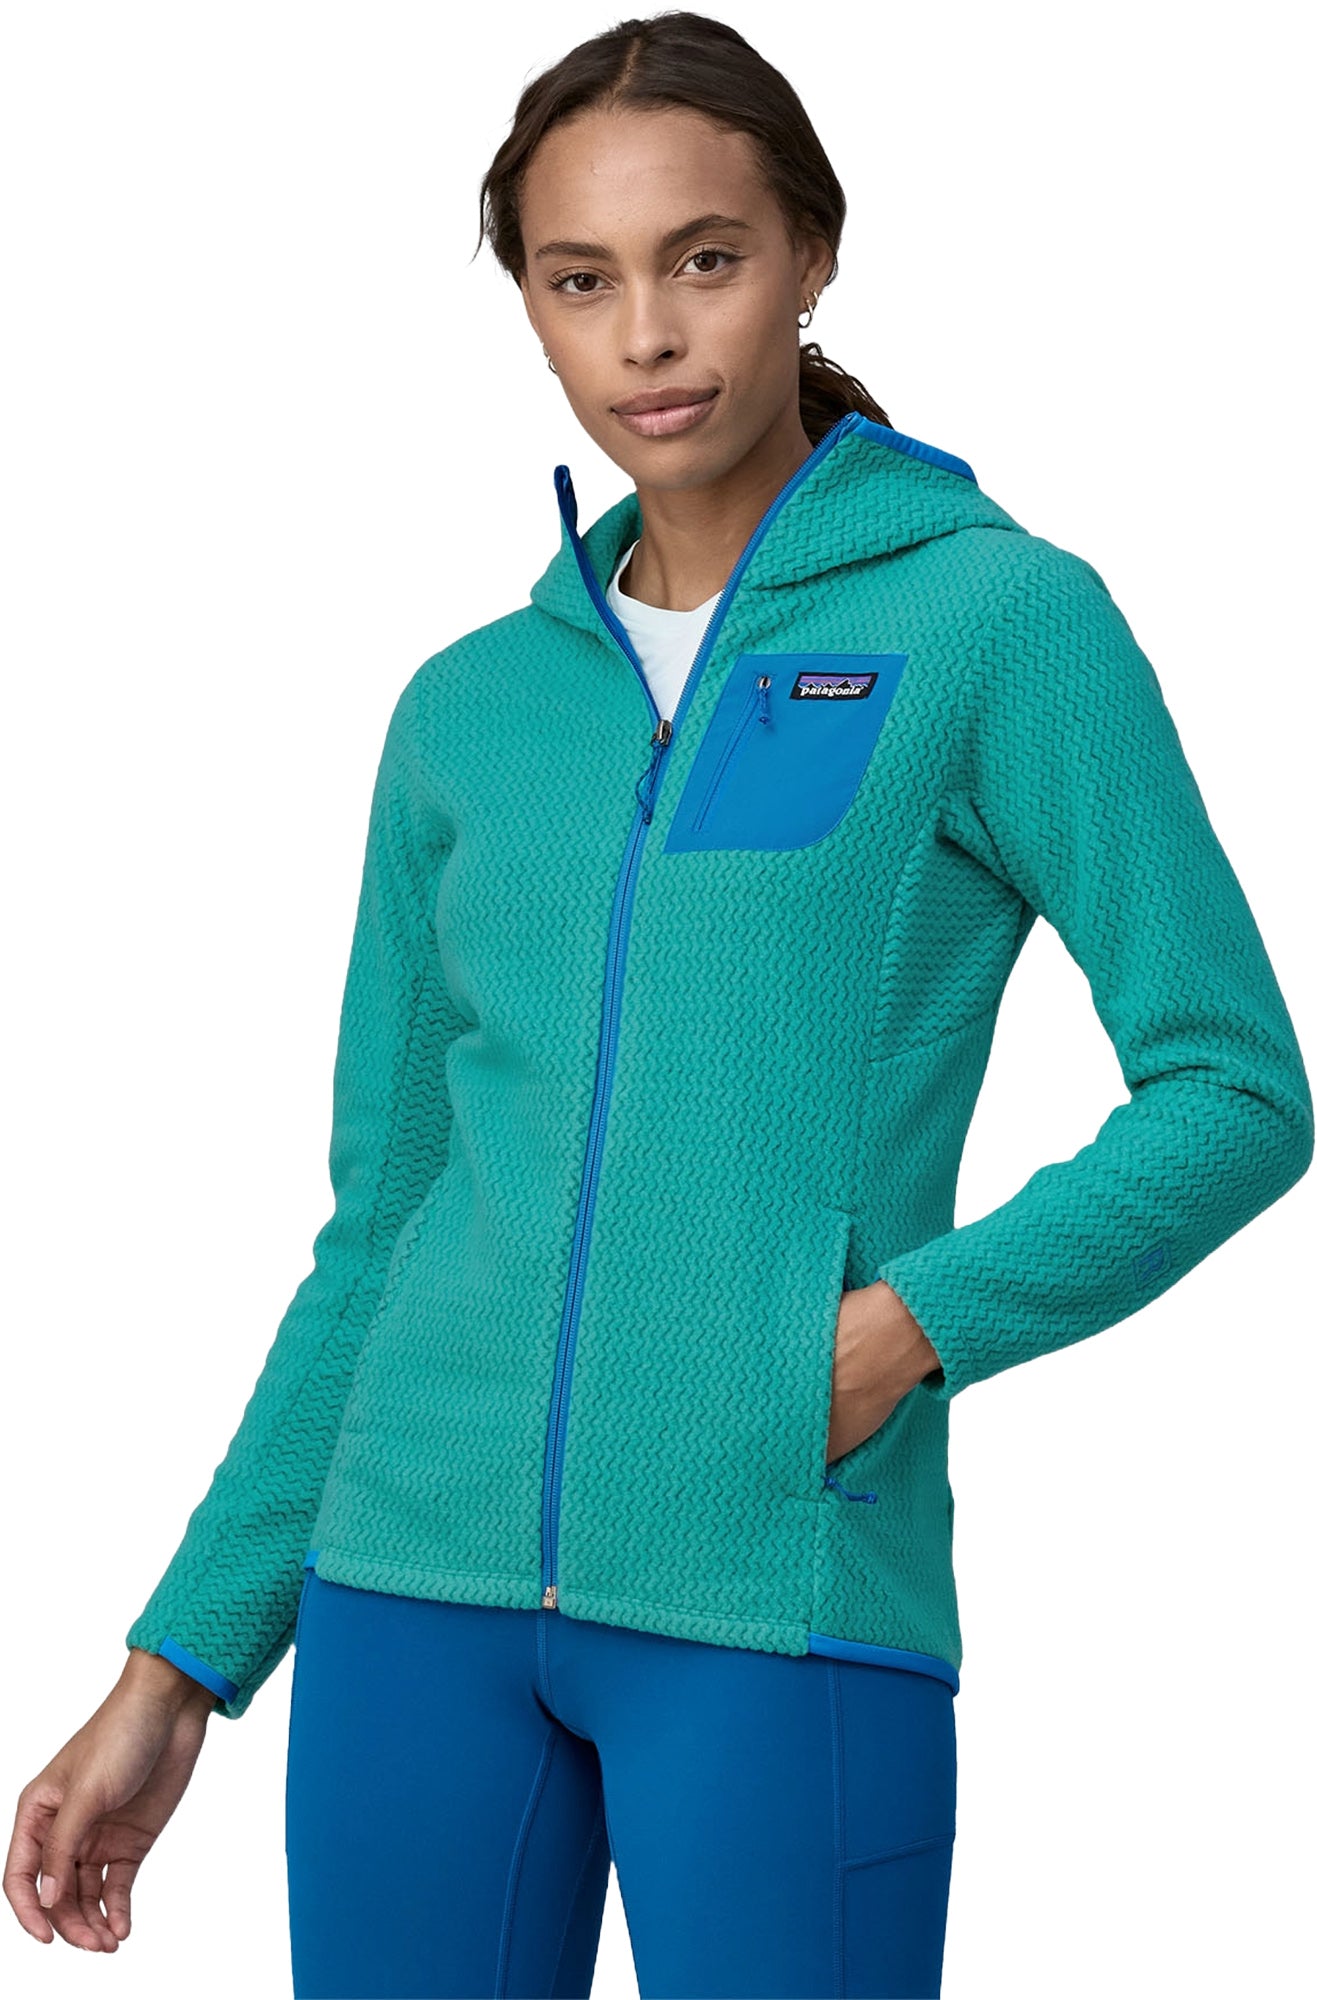 Patagonia Jacket h2no⁰ Blue Hooded Arm Vents Adult Womens Size Large RN  51884